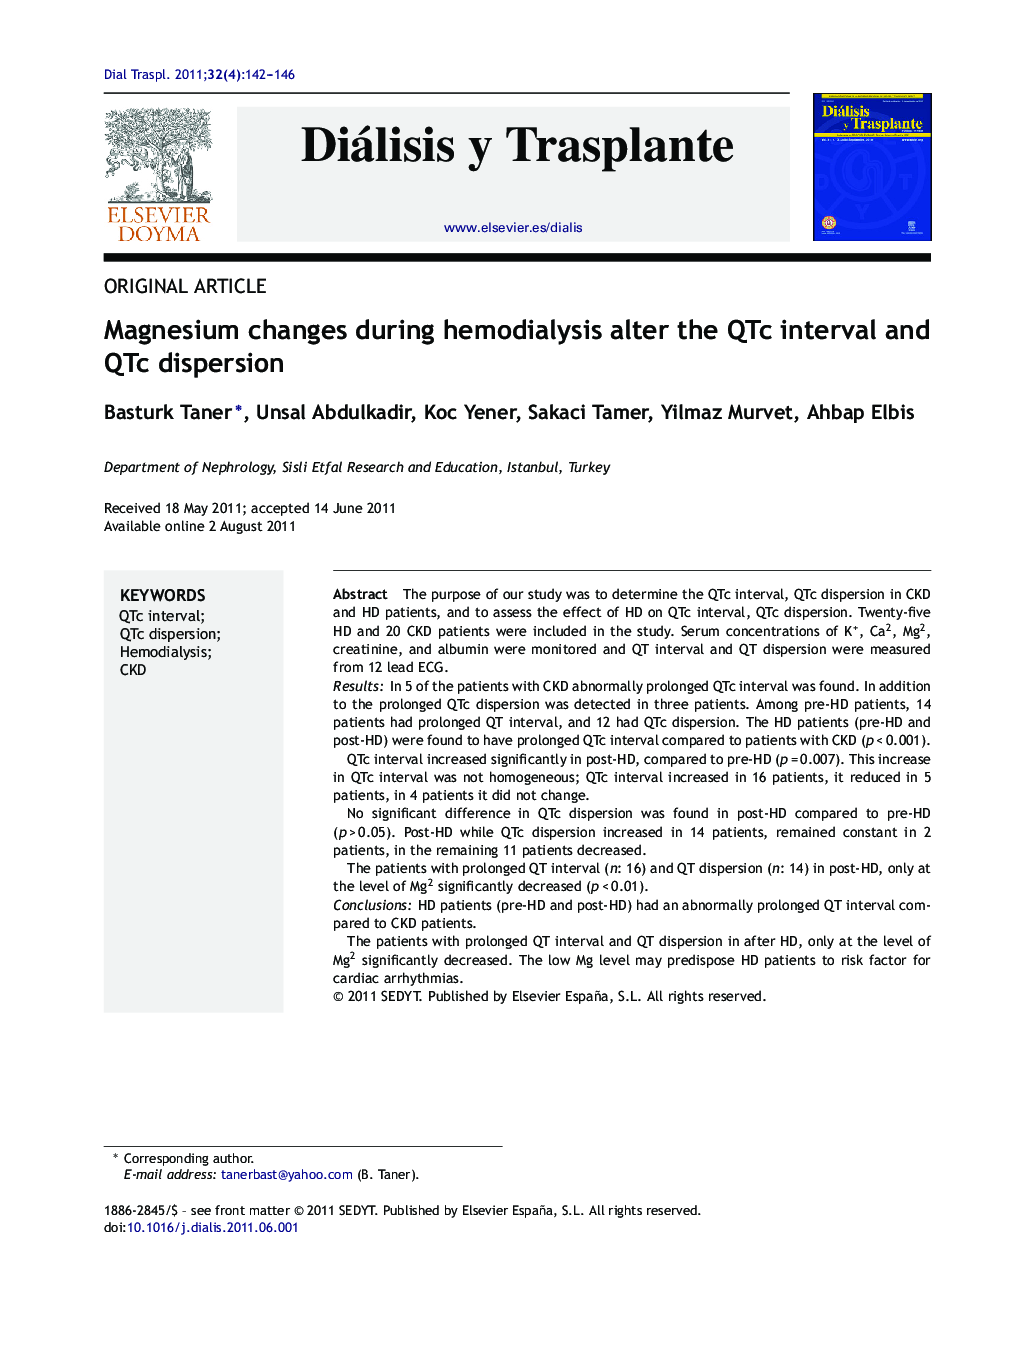 Magnesium changes during hemodialysis alter the QTc interval and QTc dispersion